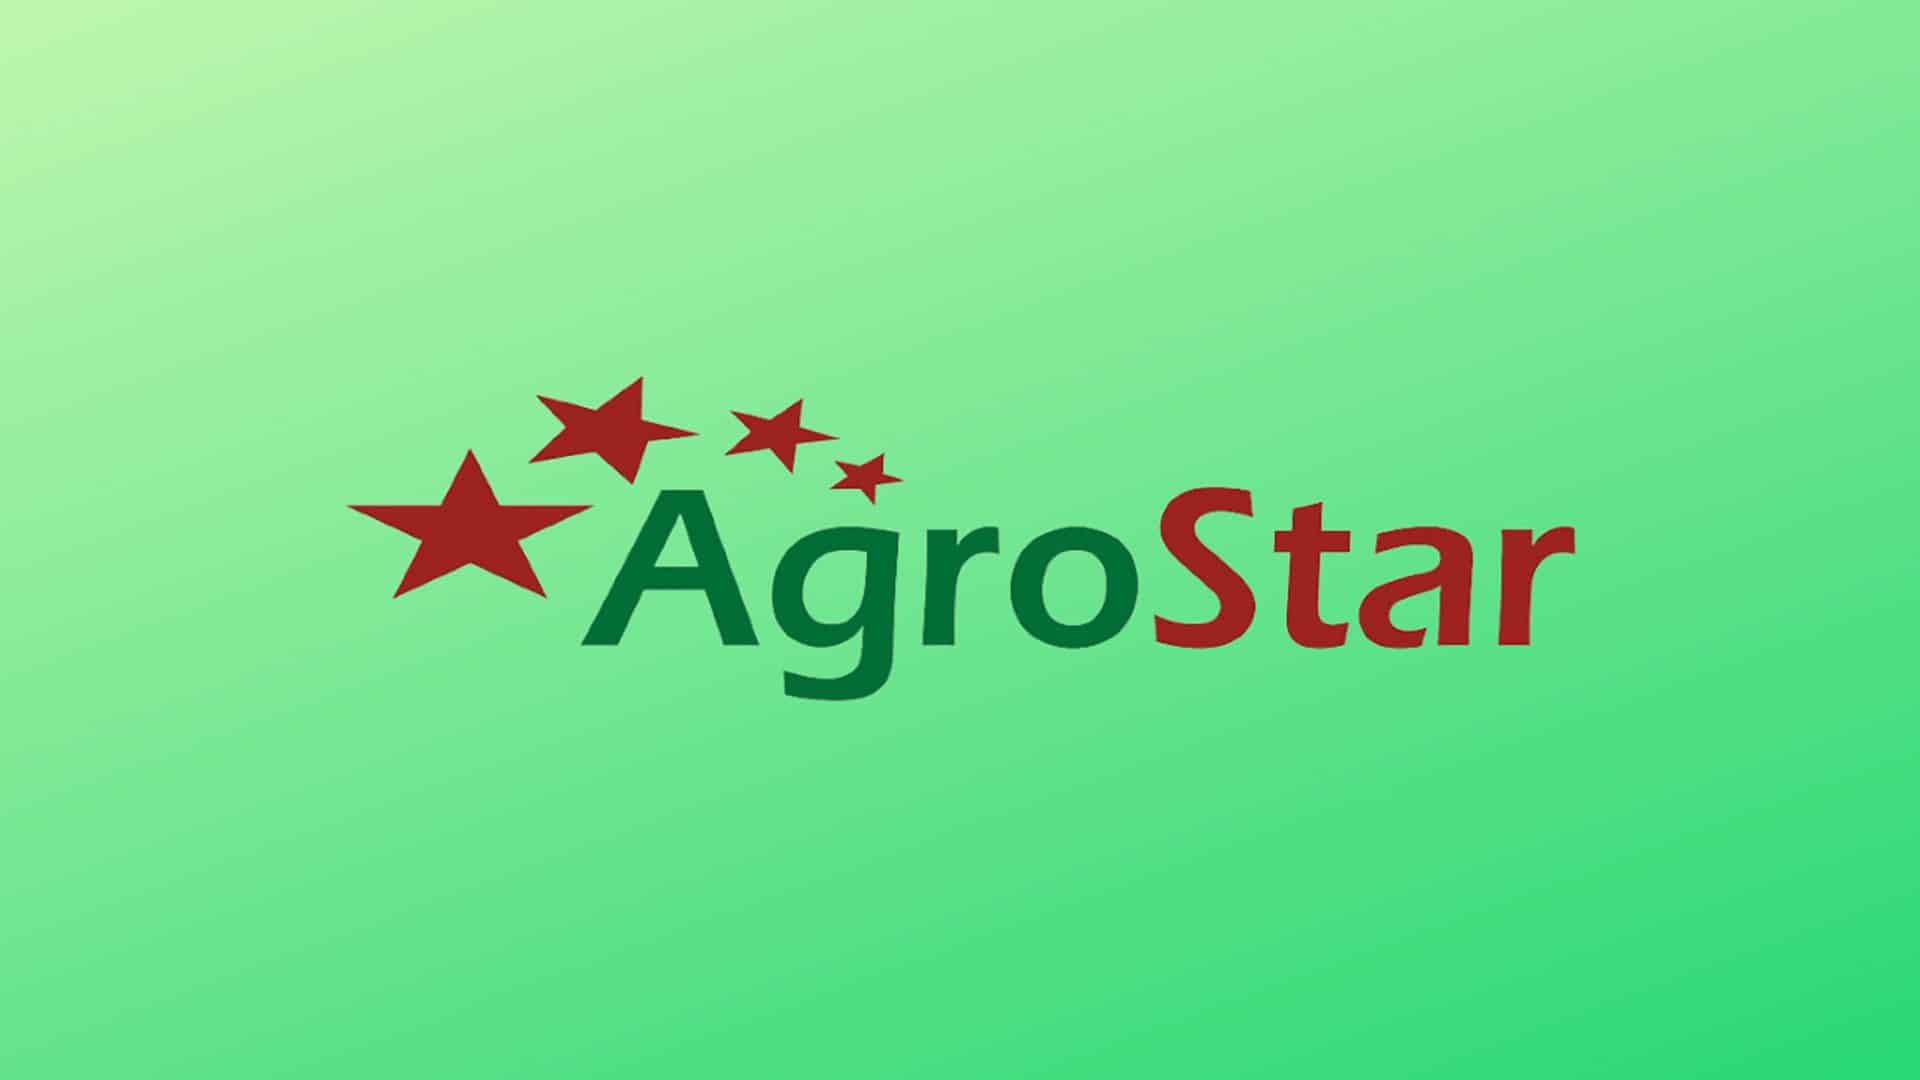 Agrostar buys INI Farms; eyes revenue of over Rs 1k cr next fiscal